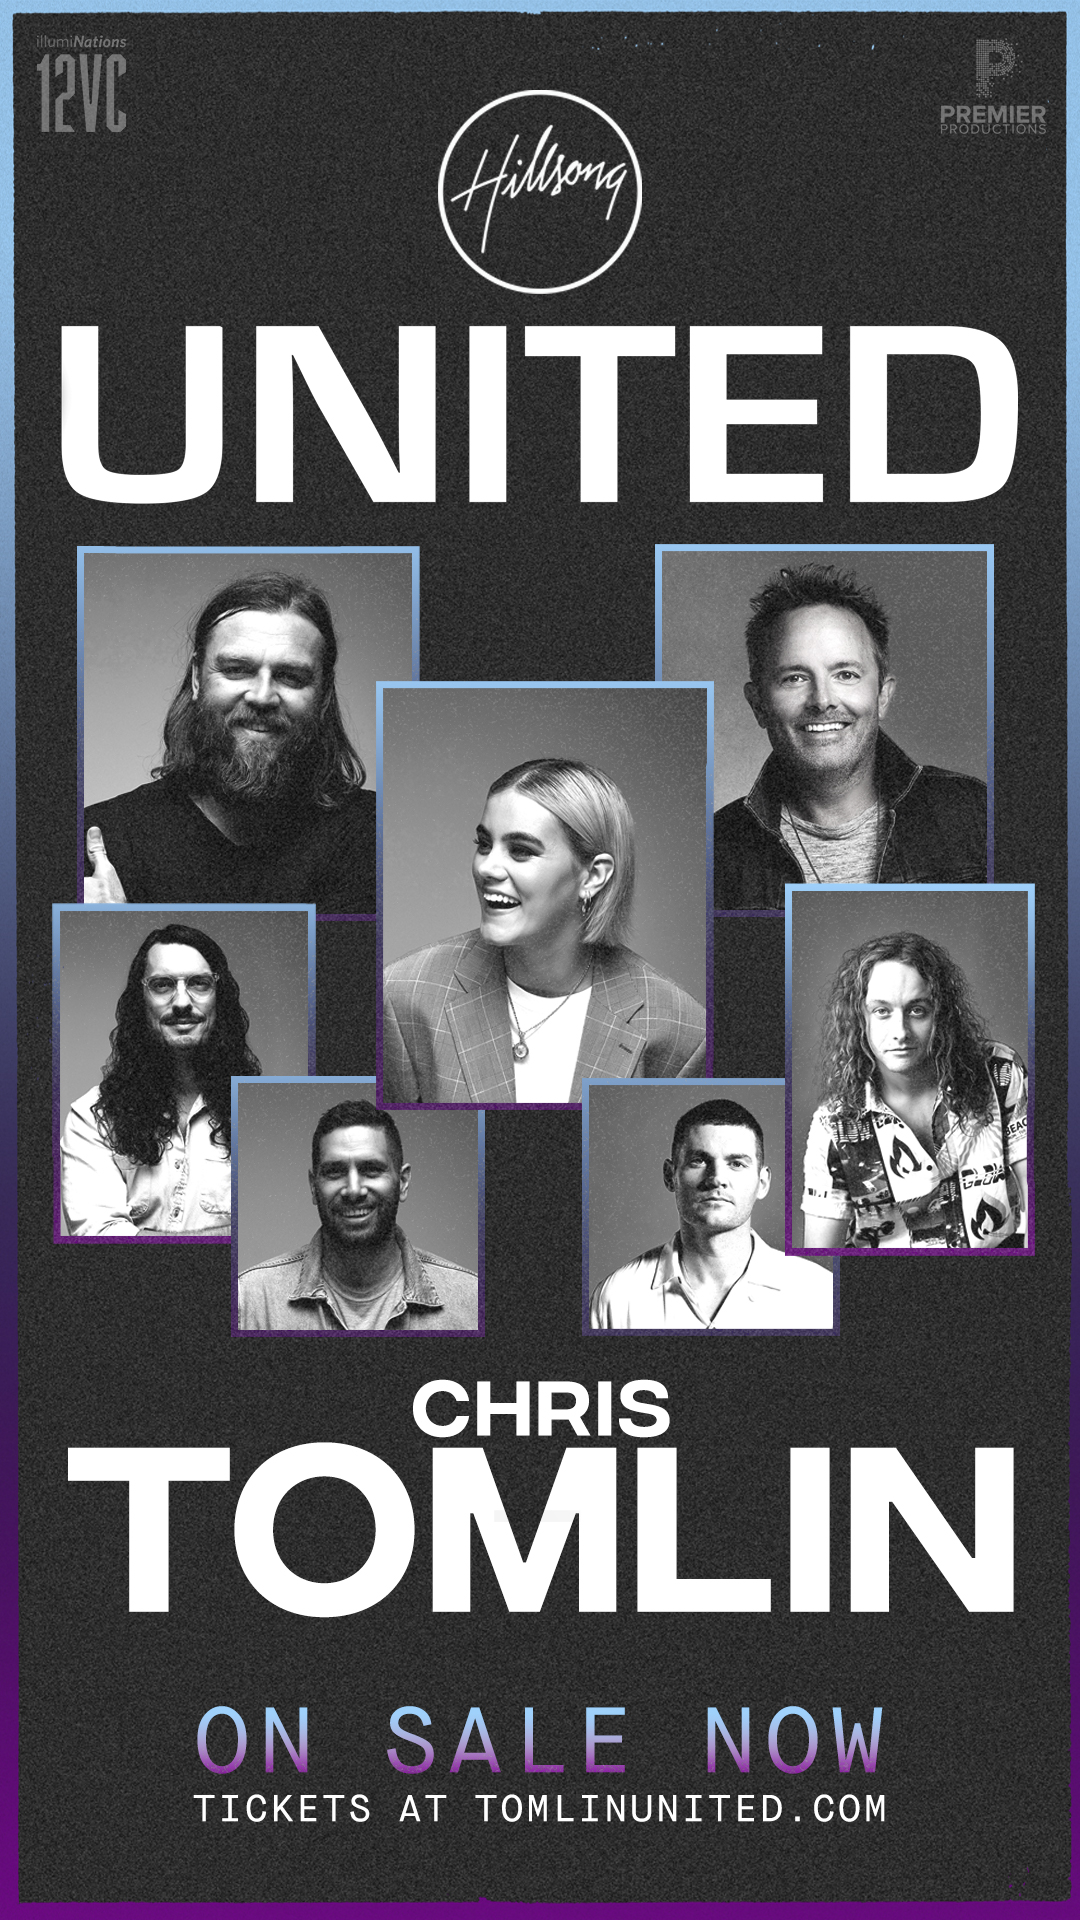 hillsong united tour dates